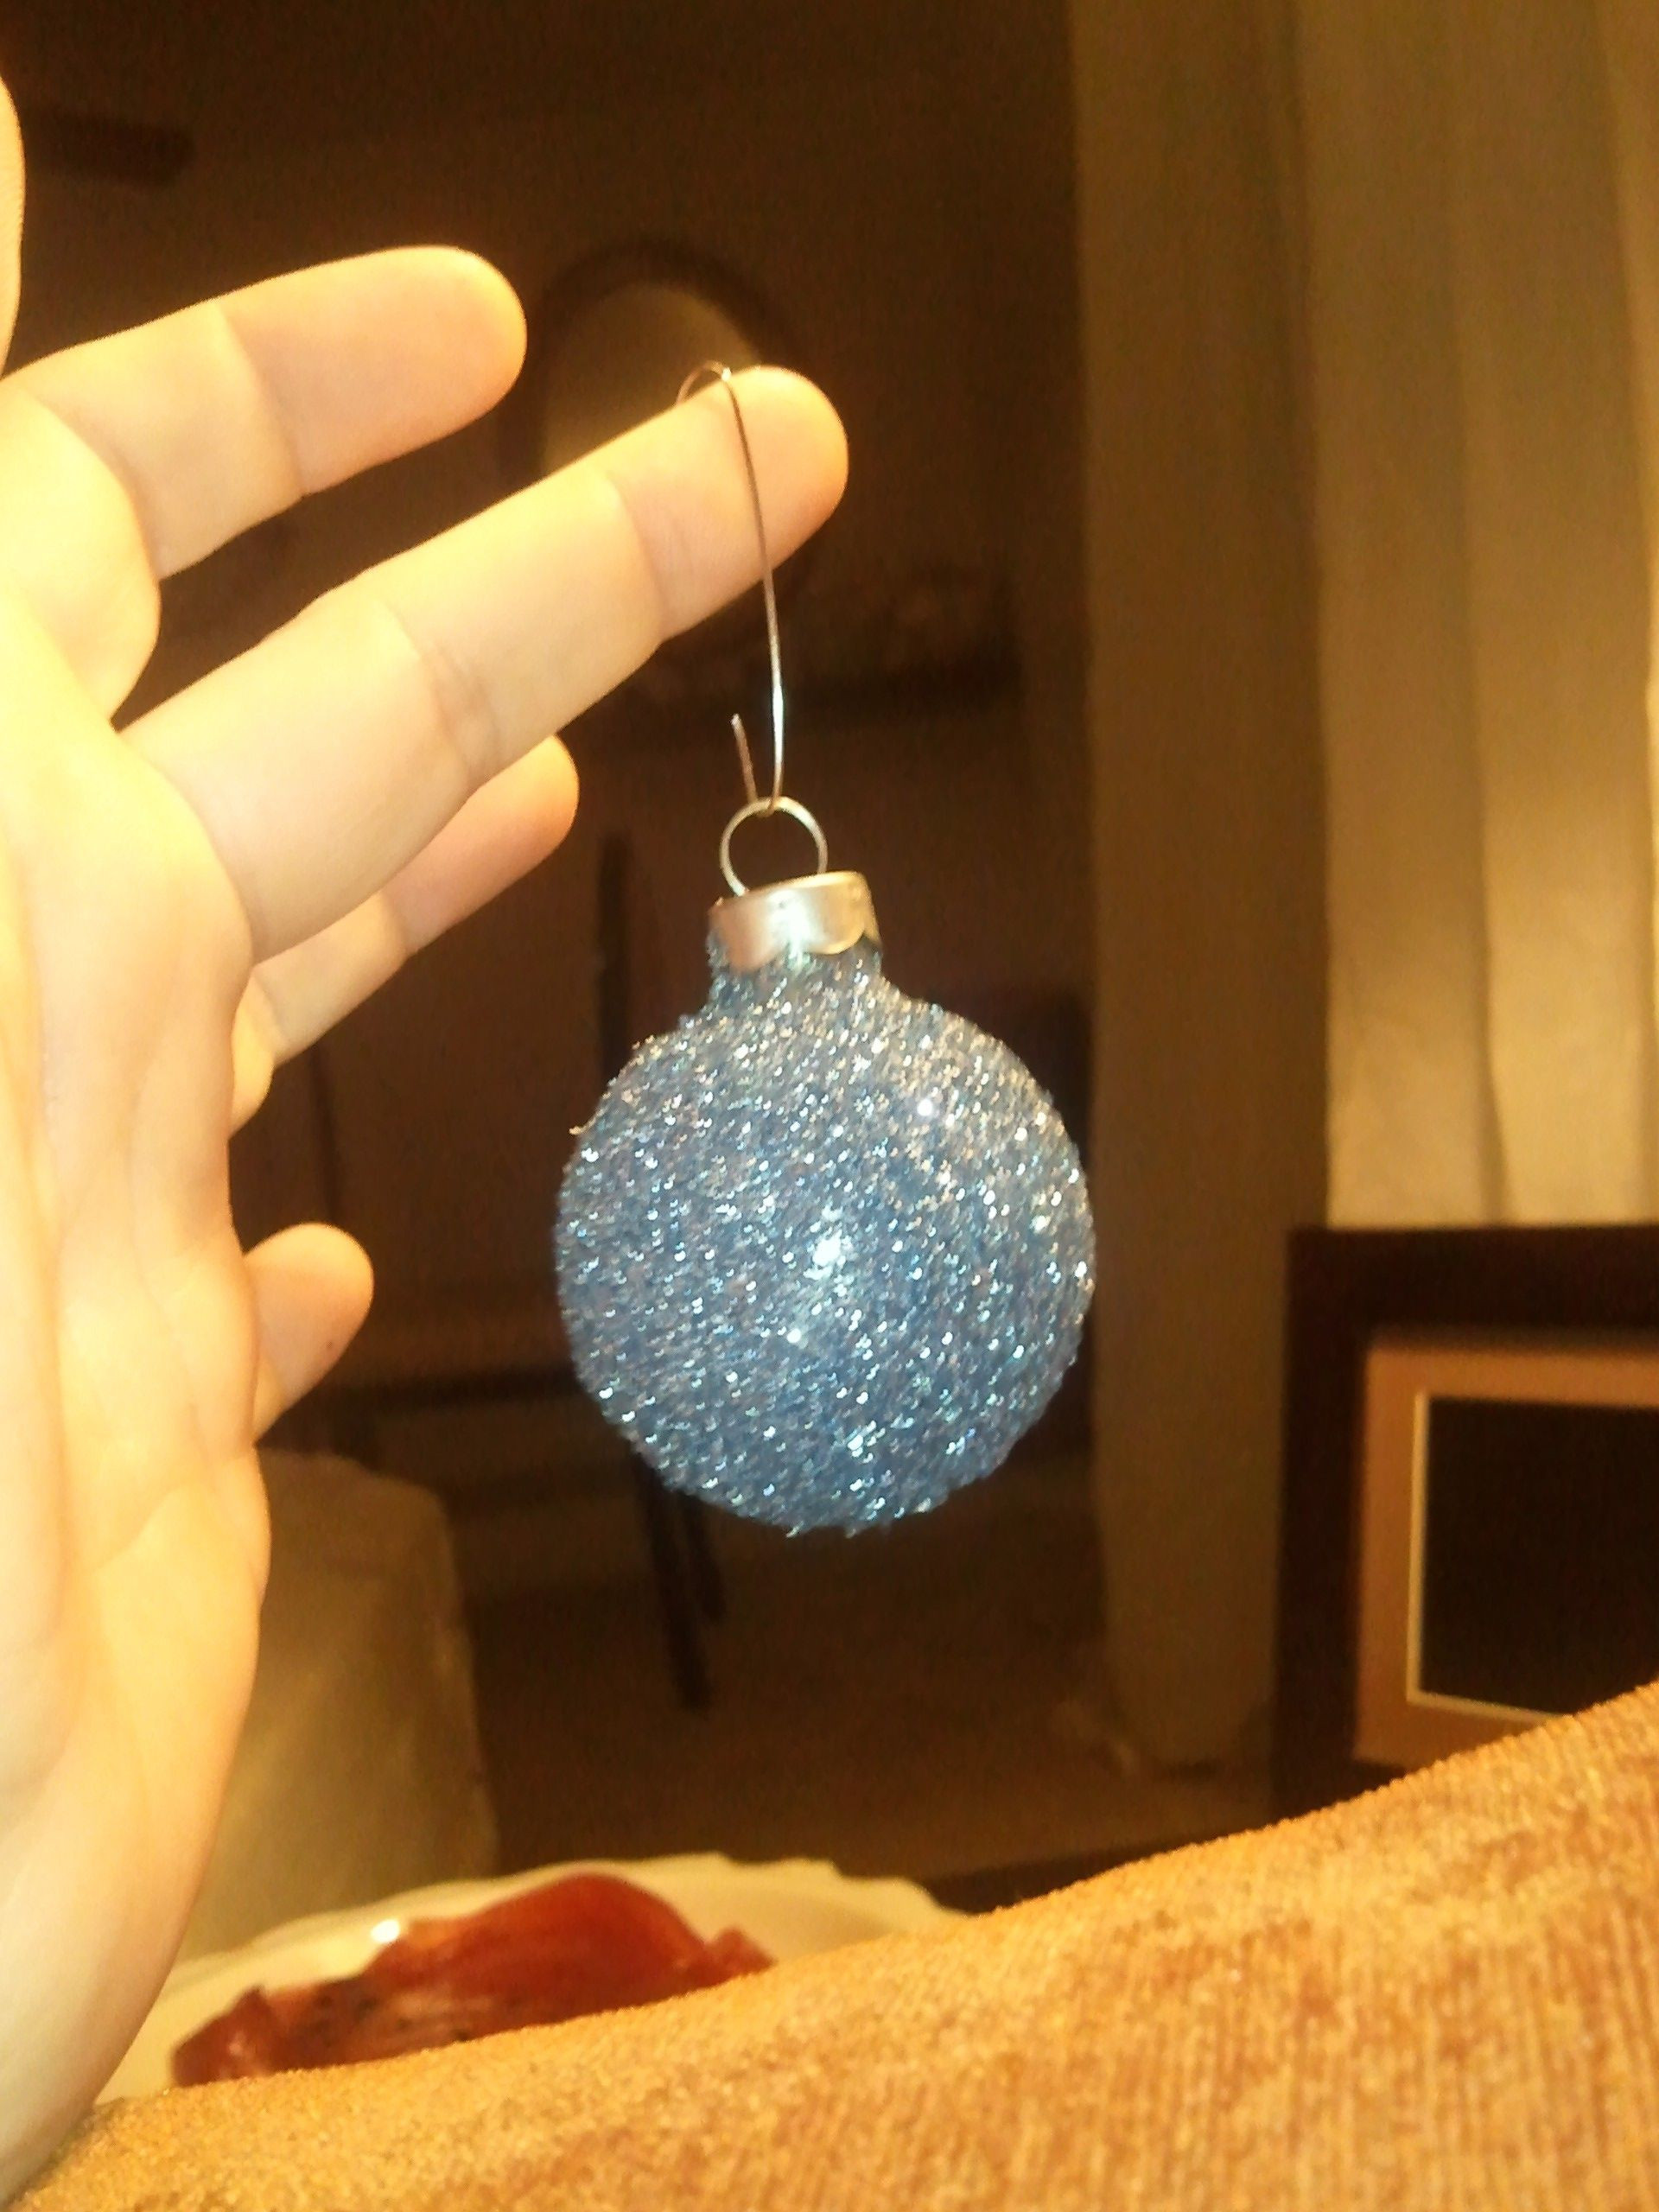 DIY Glitter Ornaments With Hairspray
 glittered ball ornaments made by sprinkling glitter on